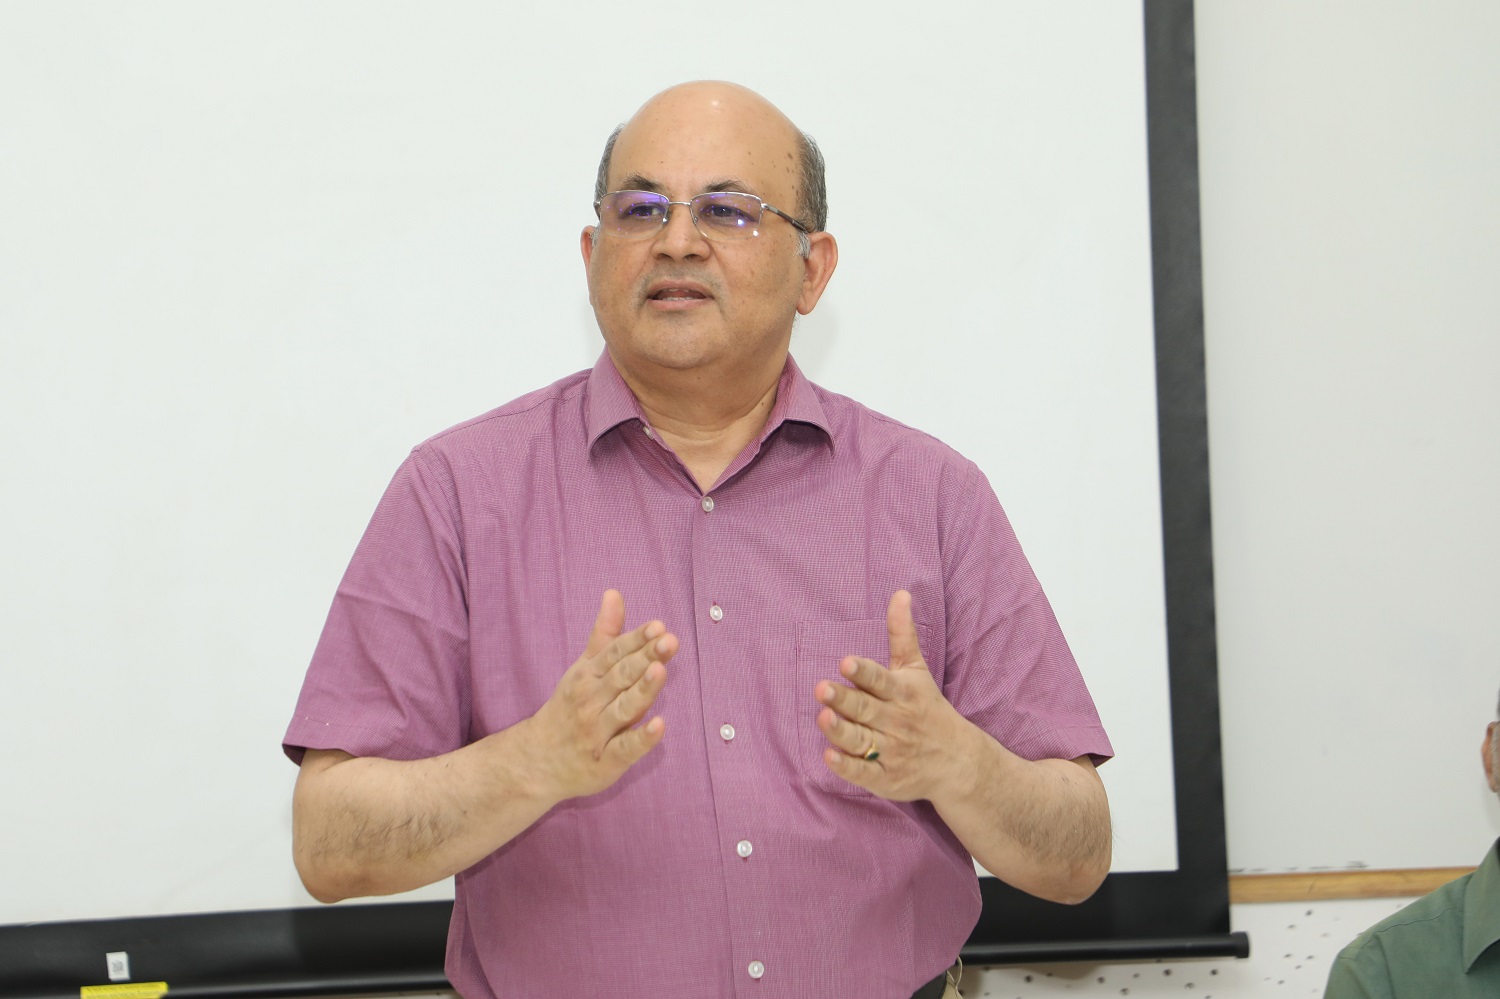 IIMB Director Professor Rishikesha T Krishnan welcomed the twelve students and said, “I am happy to see your varied background and valued experience,”